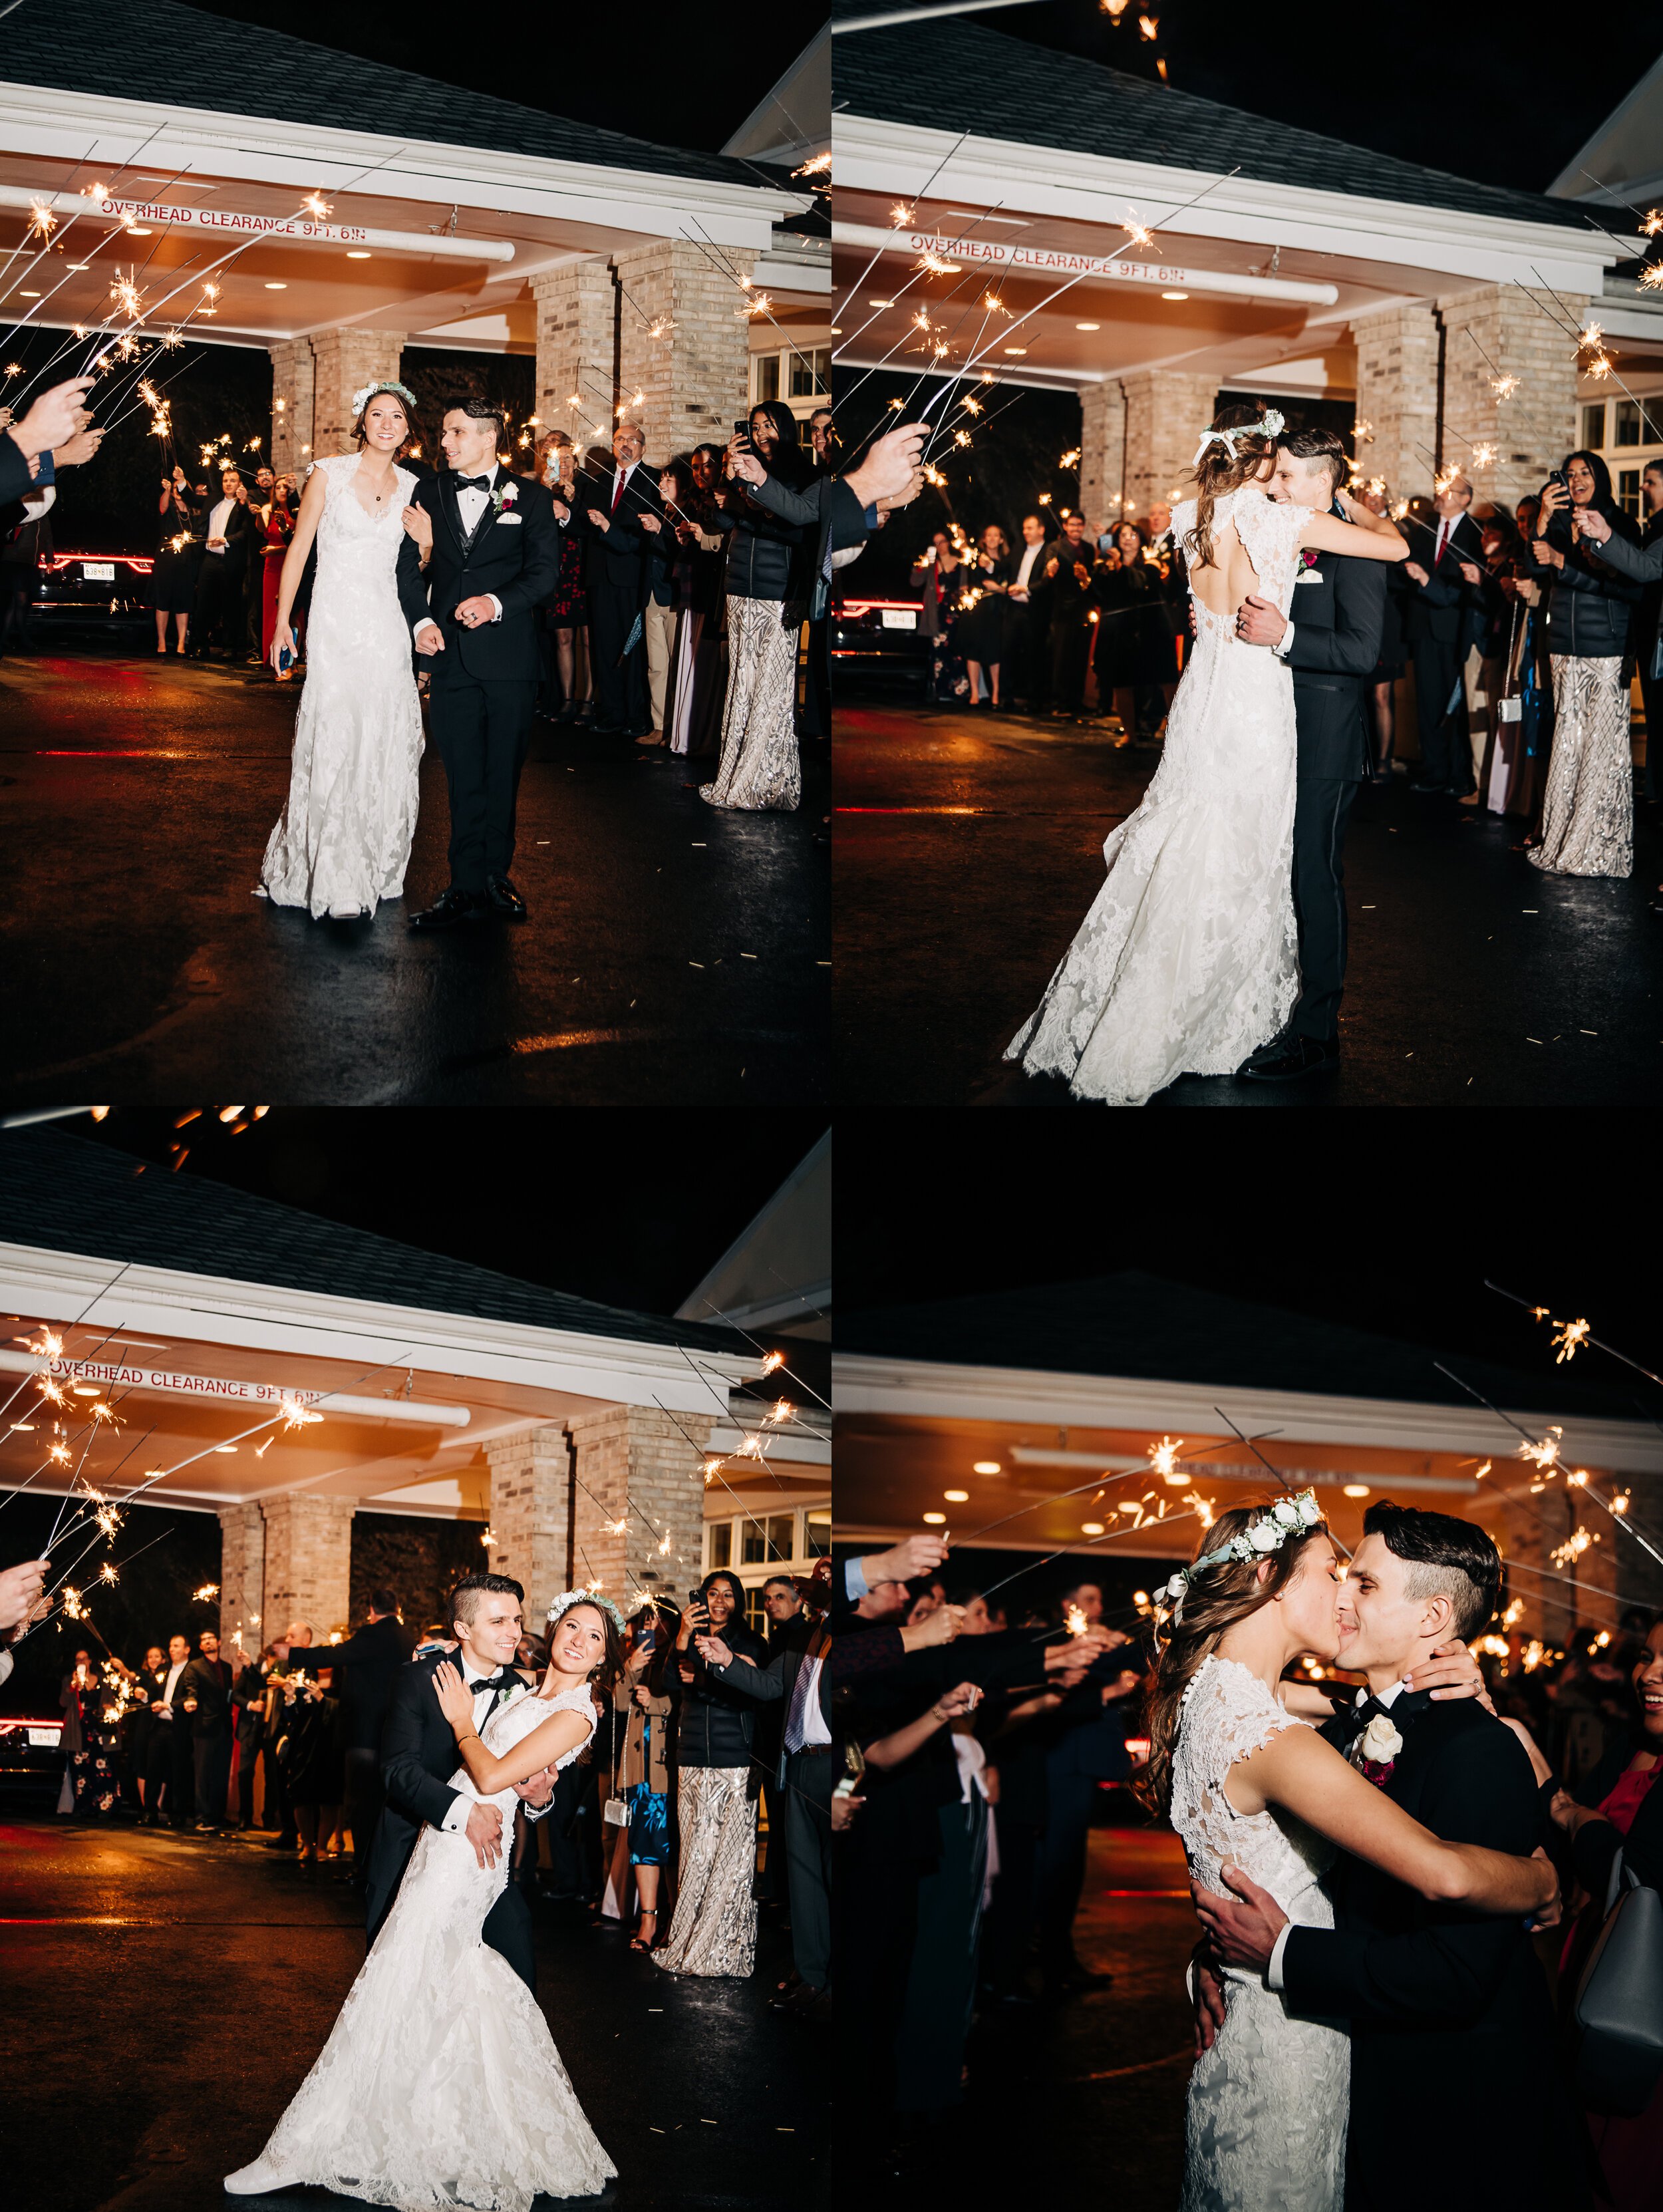 Manor Country Club wedding in Rockville MD  - sparkler exit